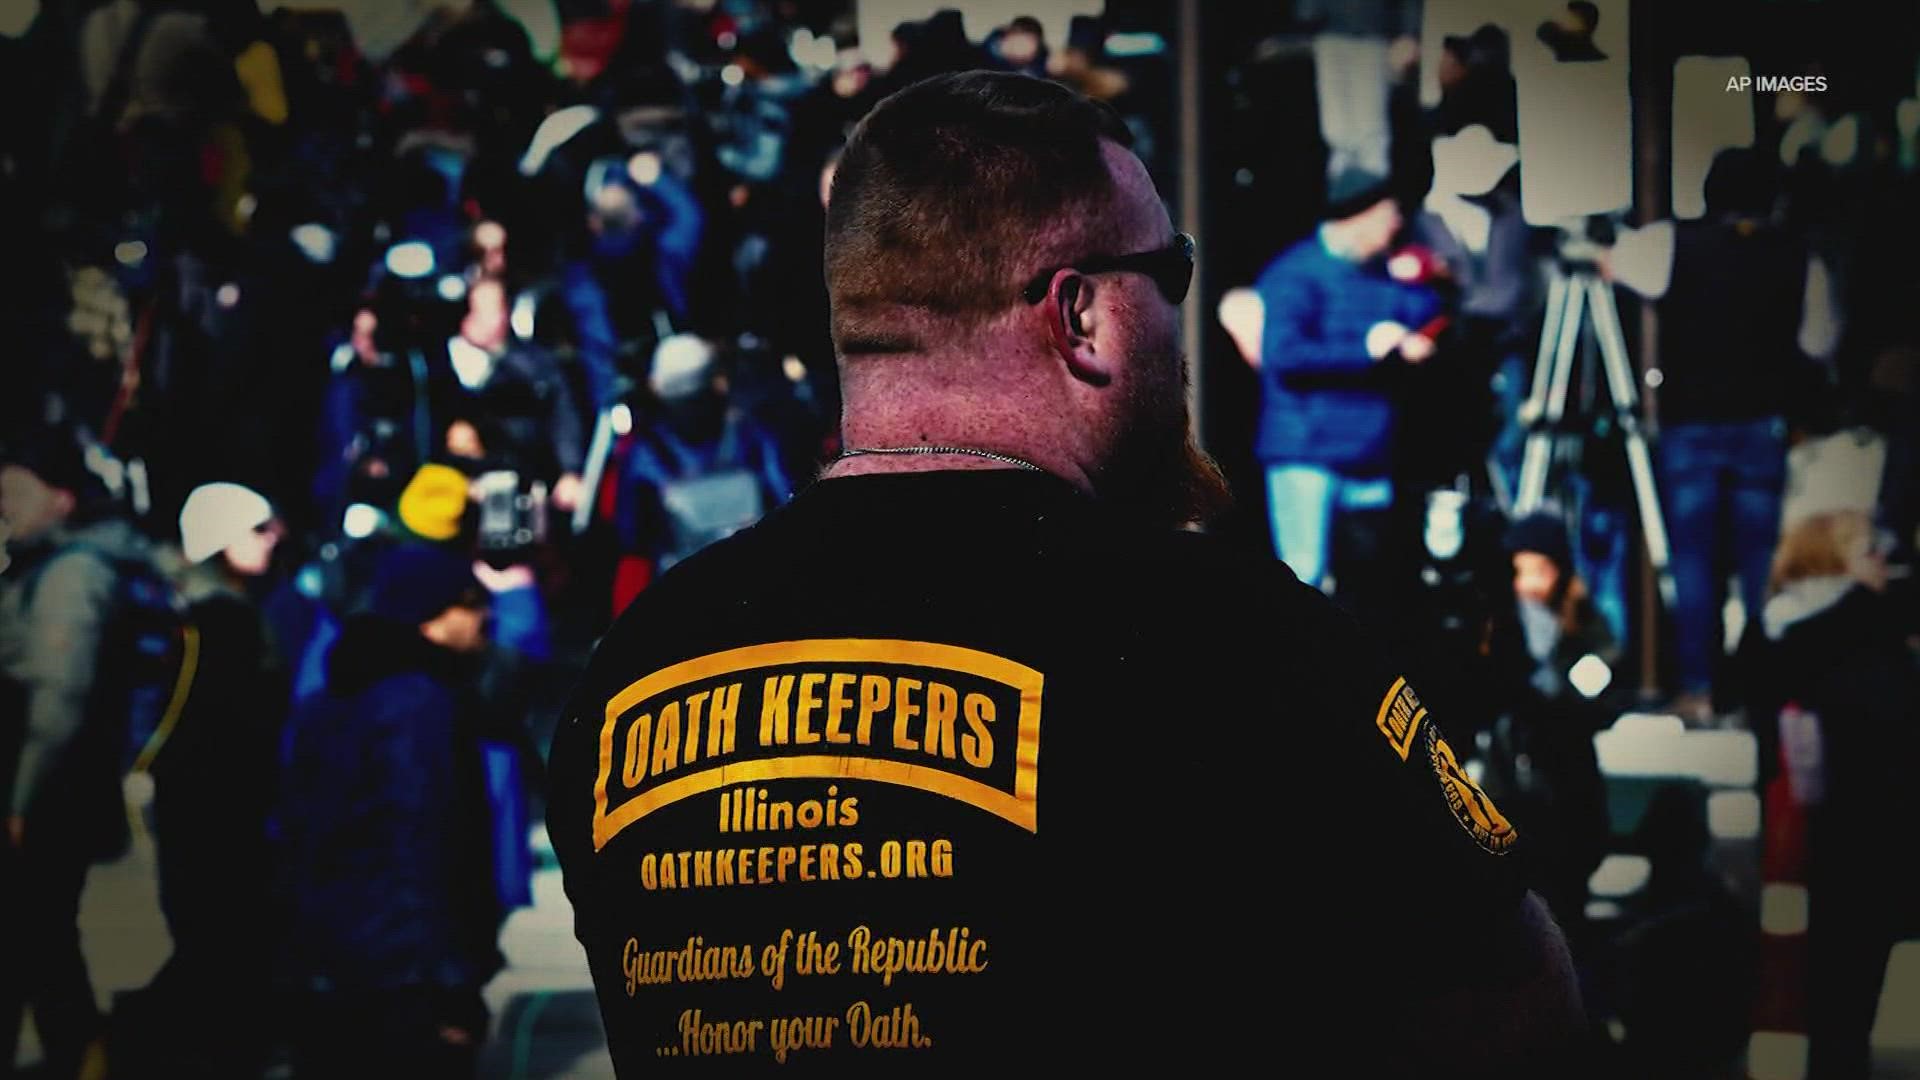 Dozens of law enforcement officers and elected officials from the Houston area signed up and paid dues to the anti-government group Oath Keepers.